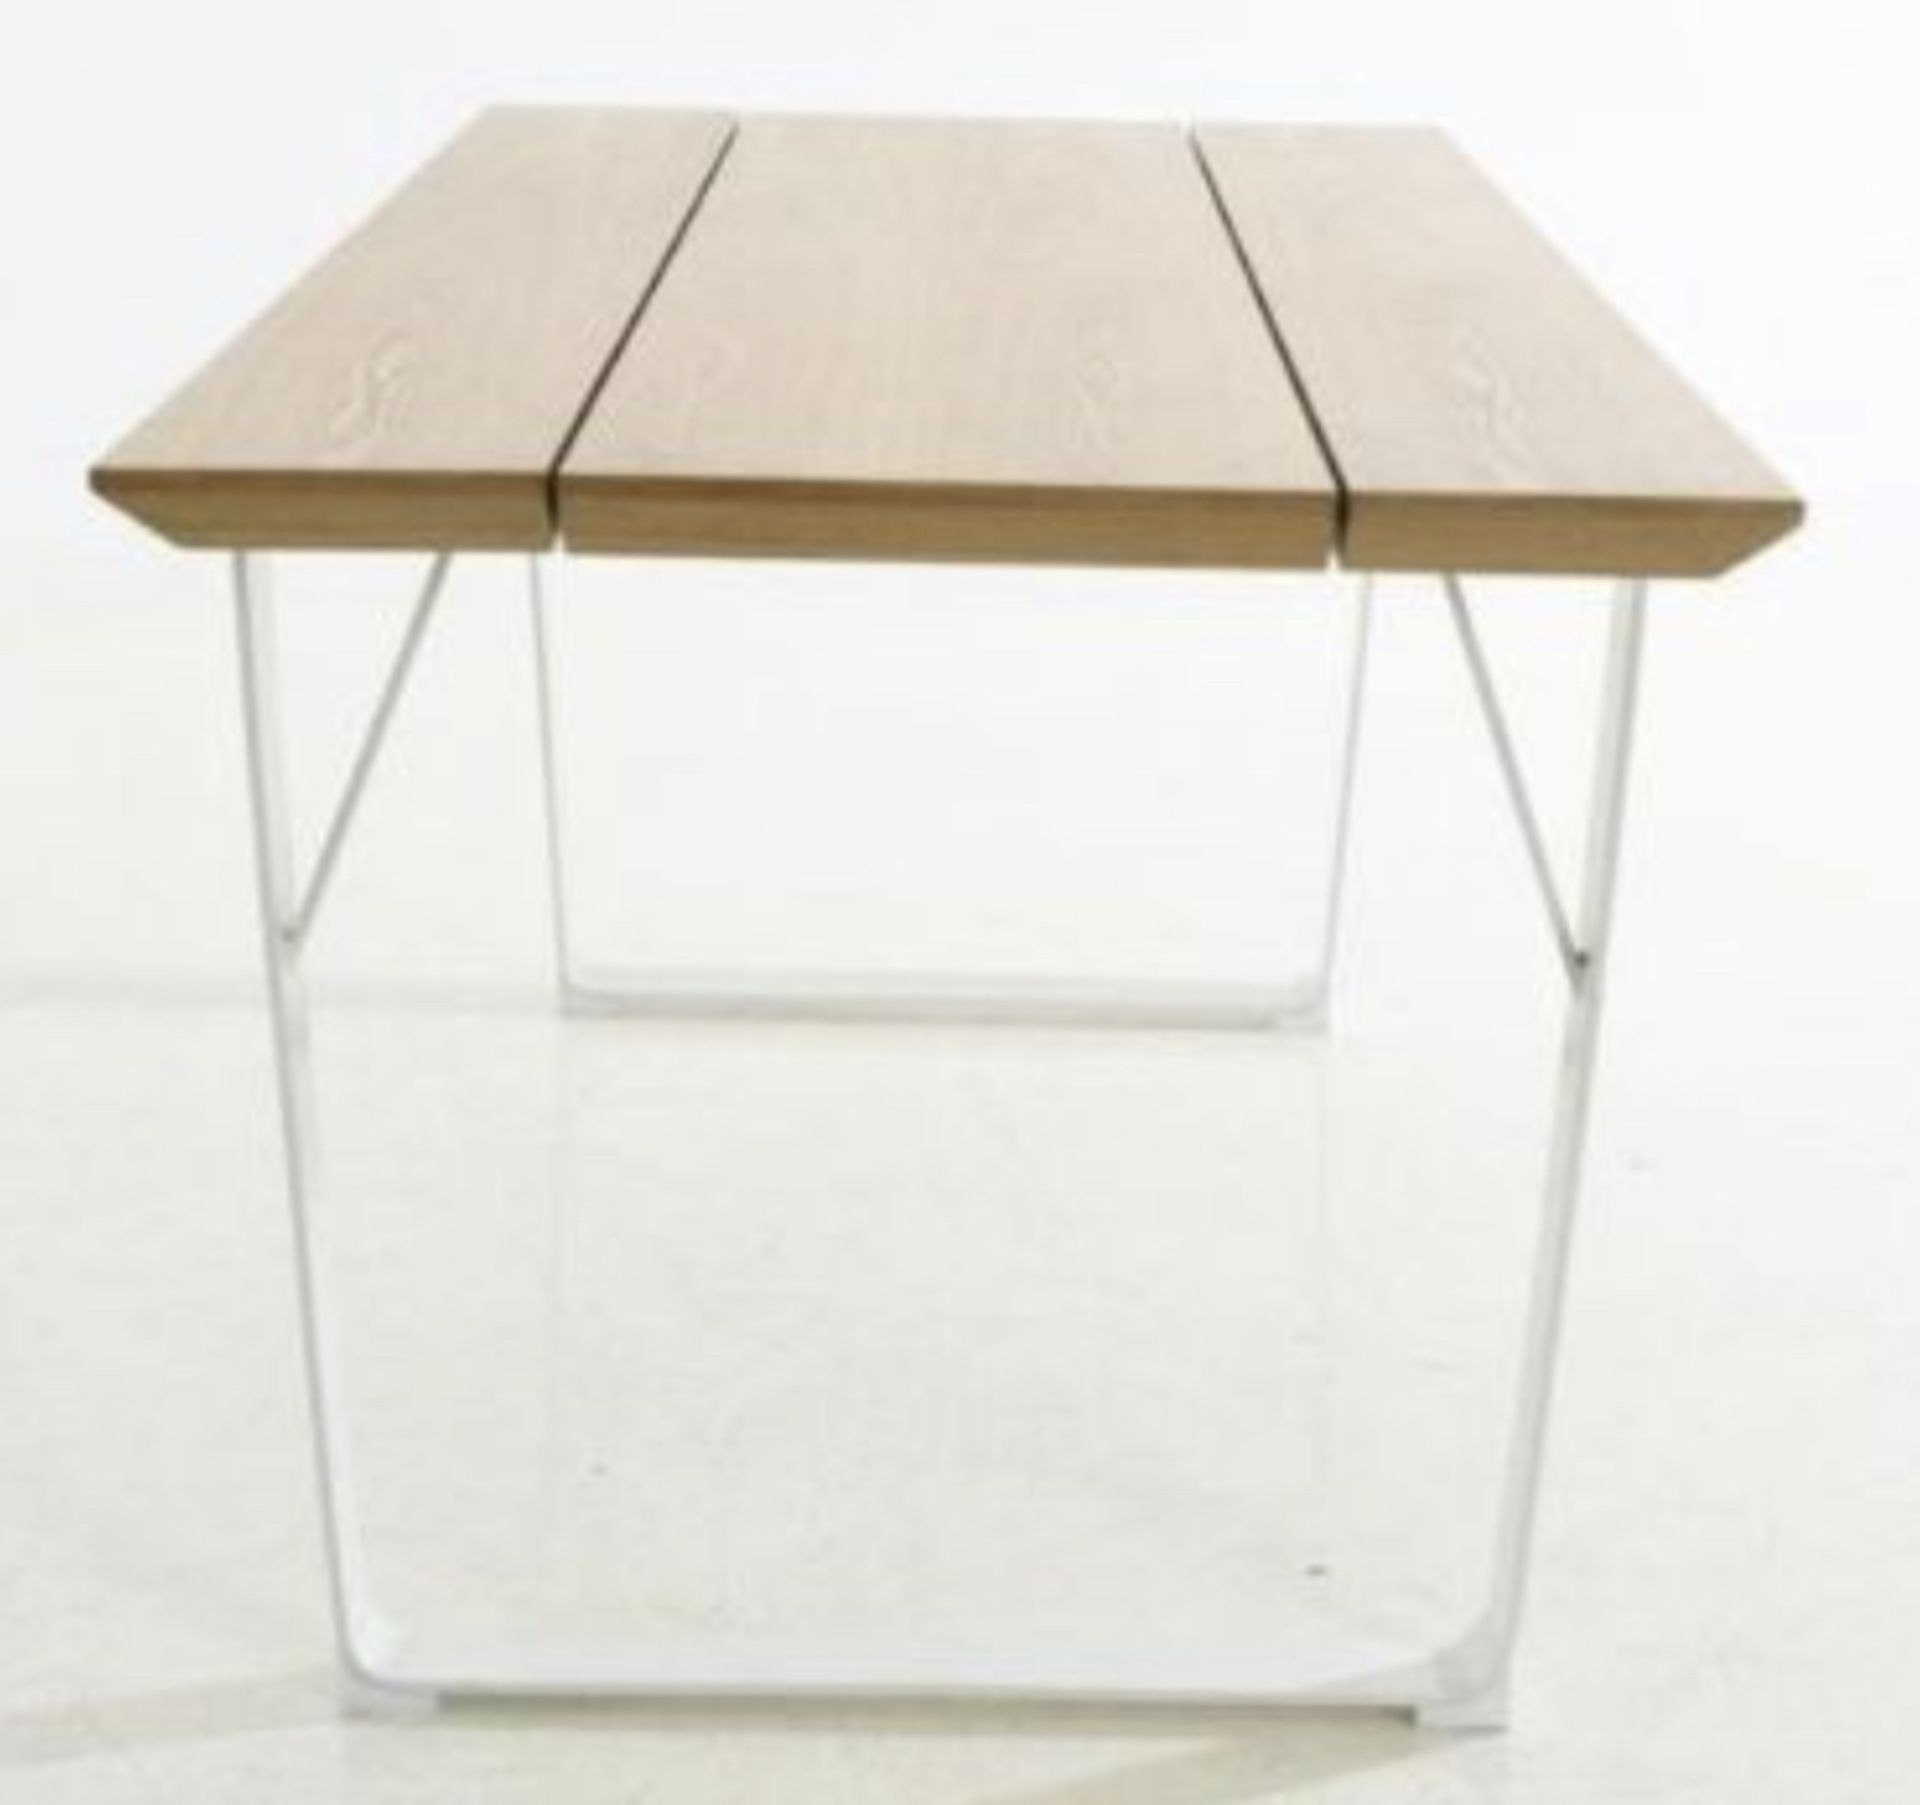 Battersea Scandinavian Style Dining Table   -  New Stock -   HUGE RRP! - Image 2 of 4